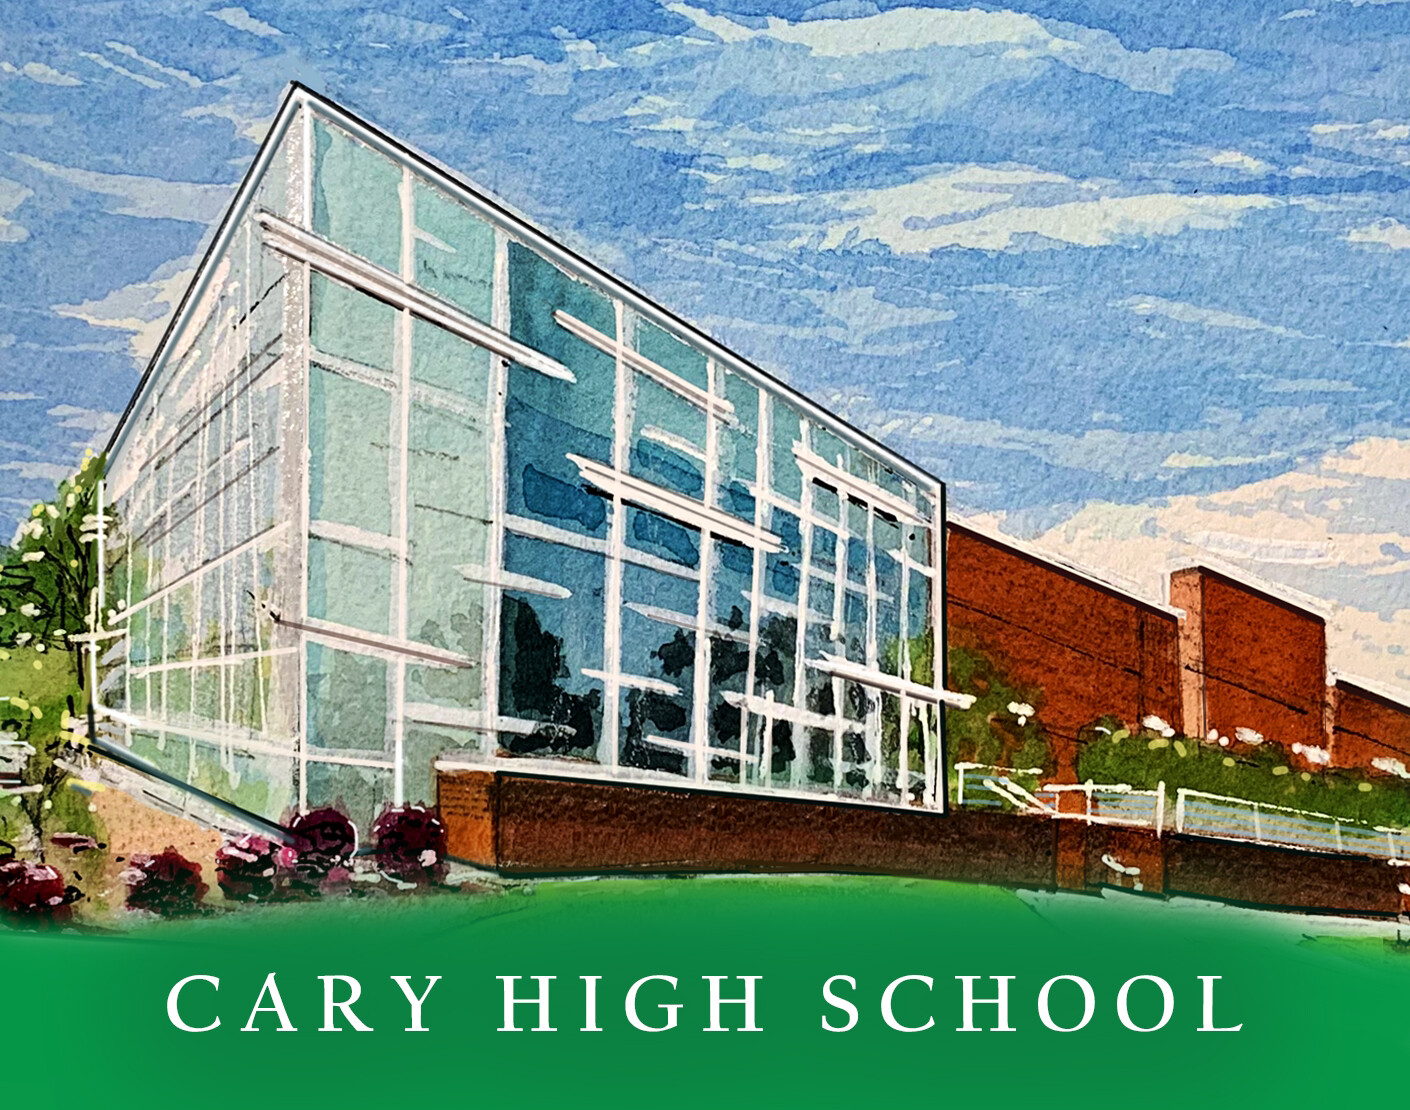 Cary, NC - Cary High School - 11"x14" - Matted Print - #lew